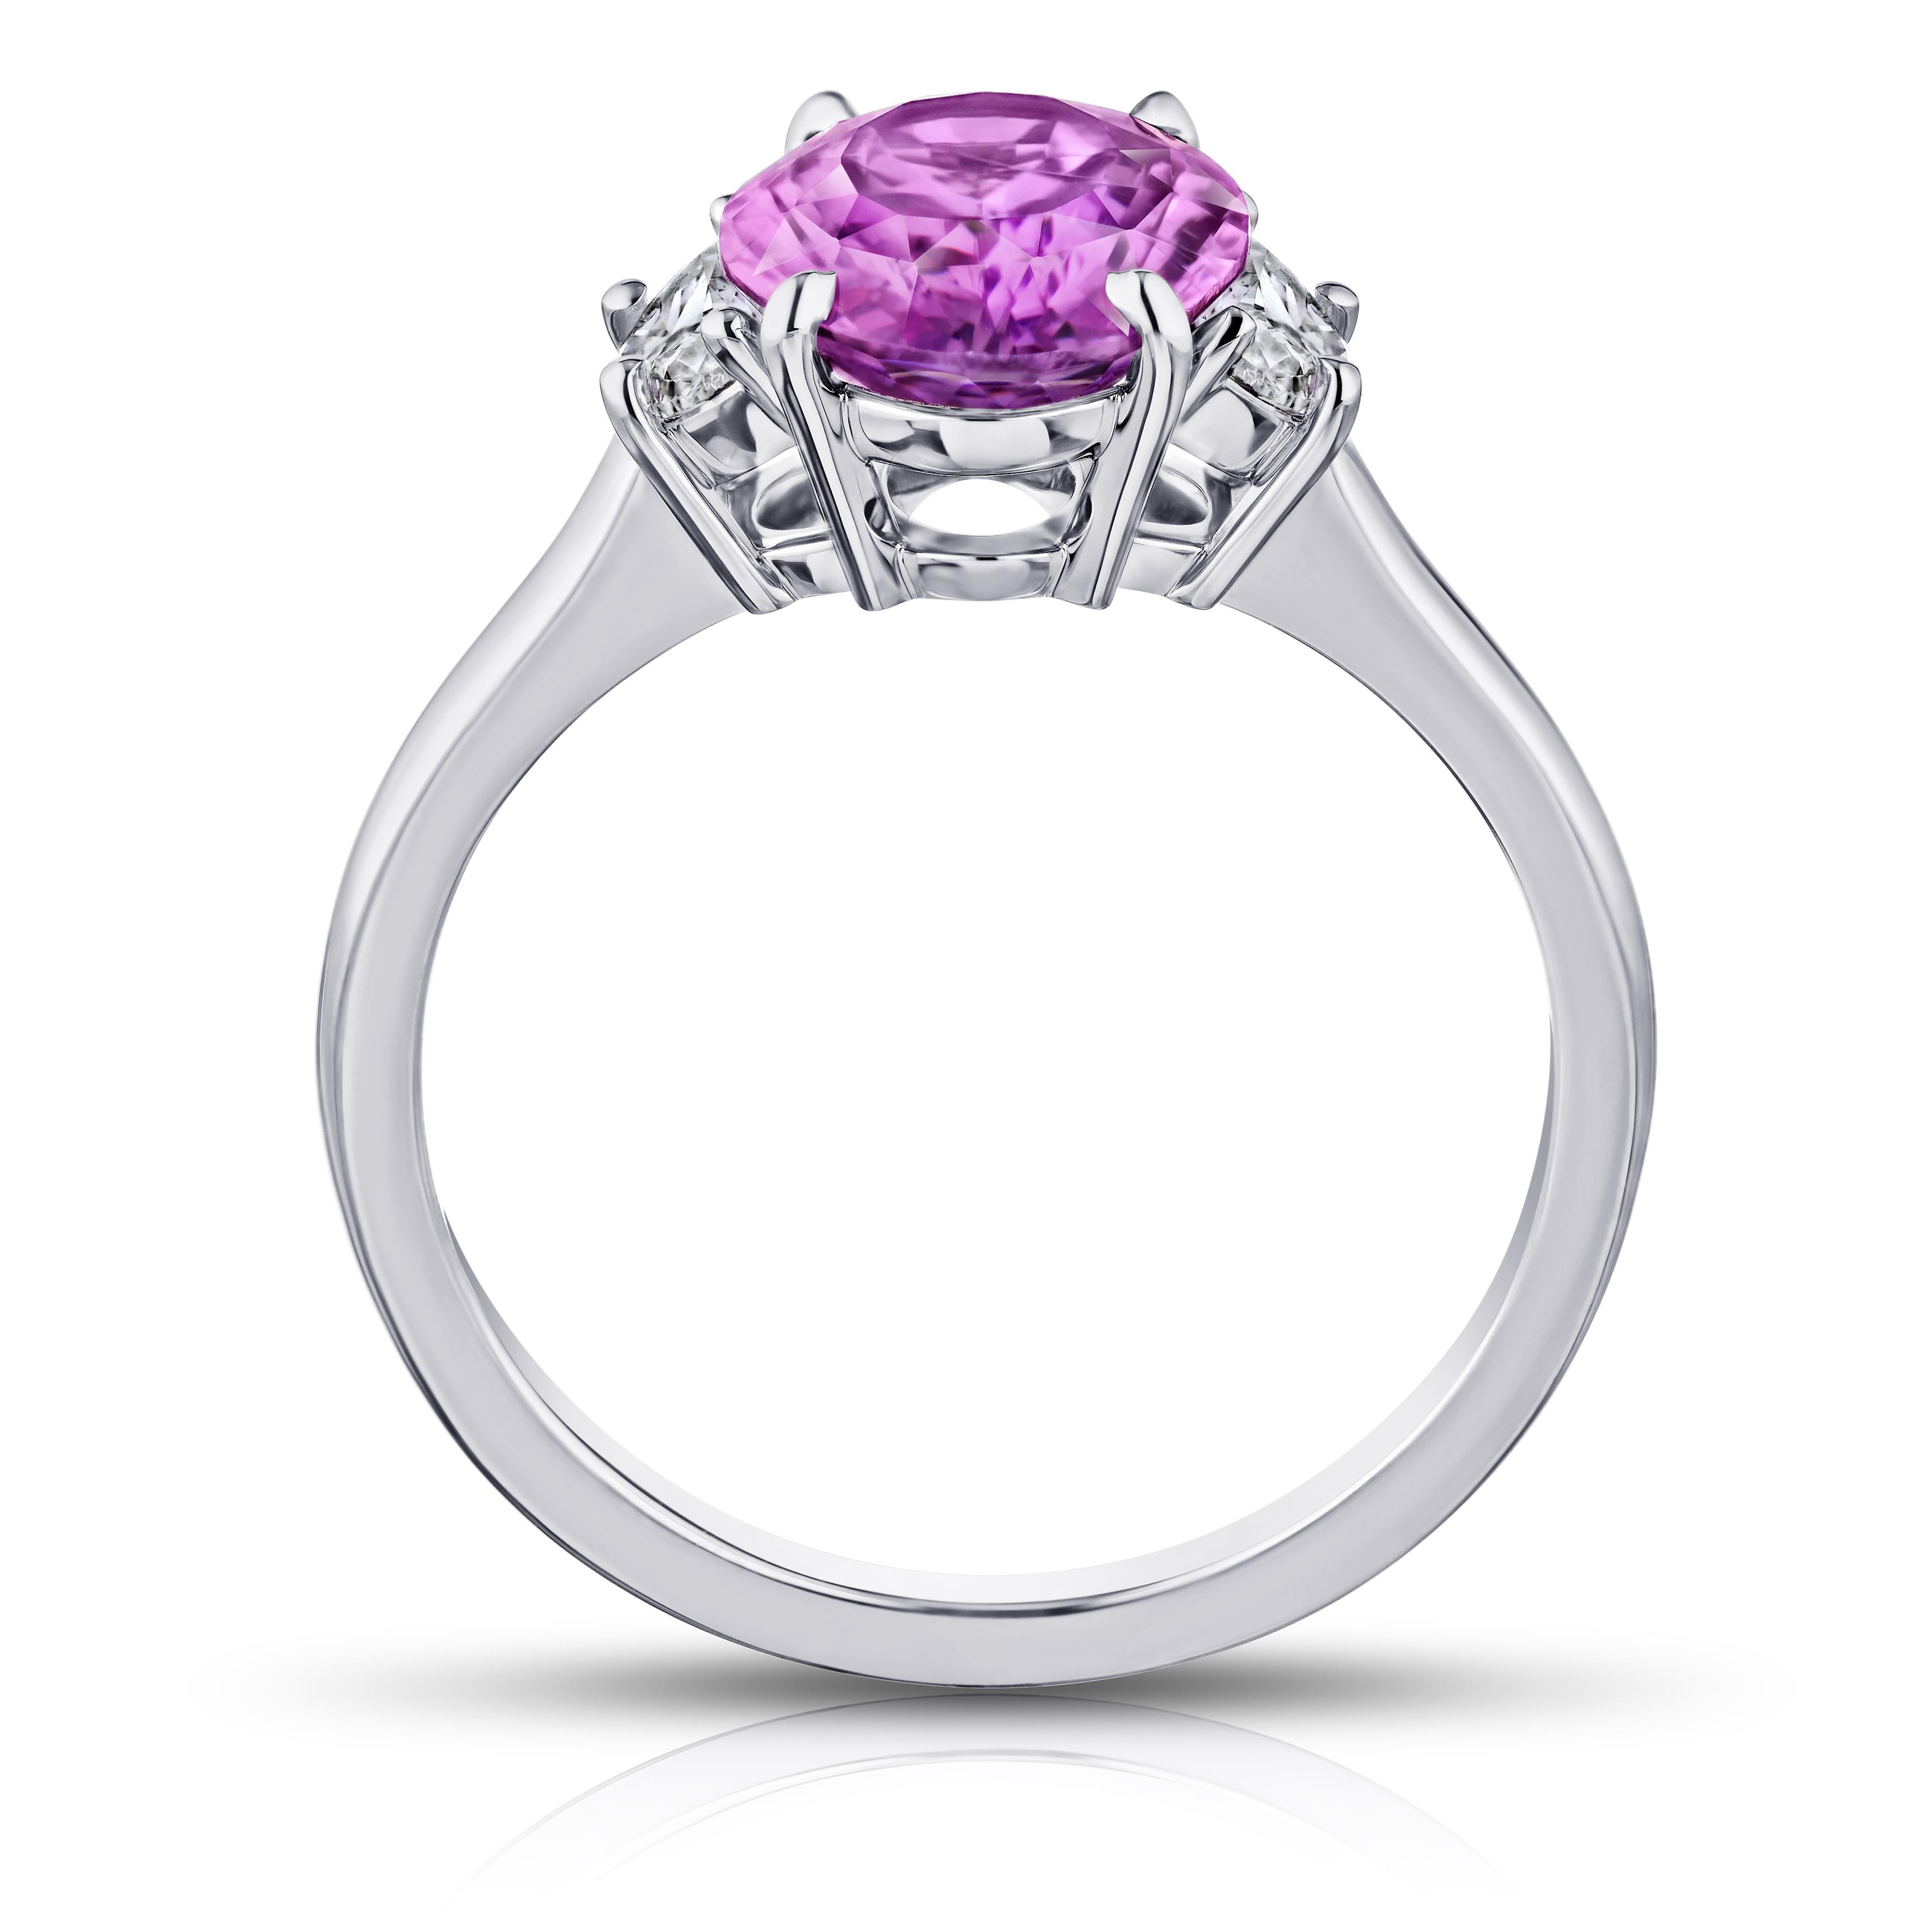 3.21 carat oval pink sapphire with half moon diamonds .36 carats set in a platinum ring. Ring is currently a size 7. Resizing to your finger size is included.
